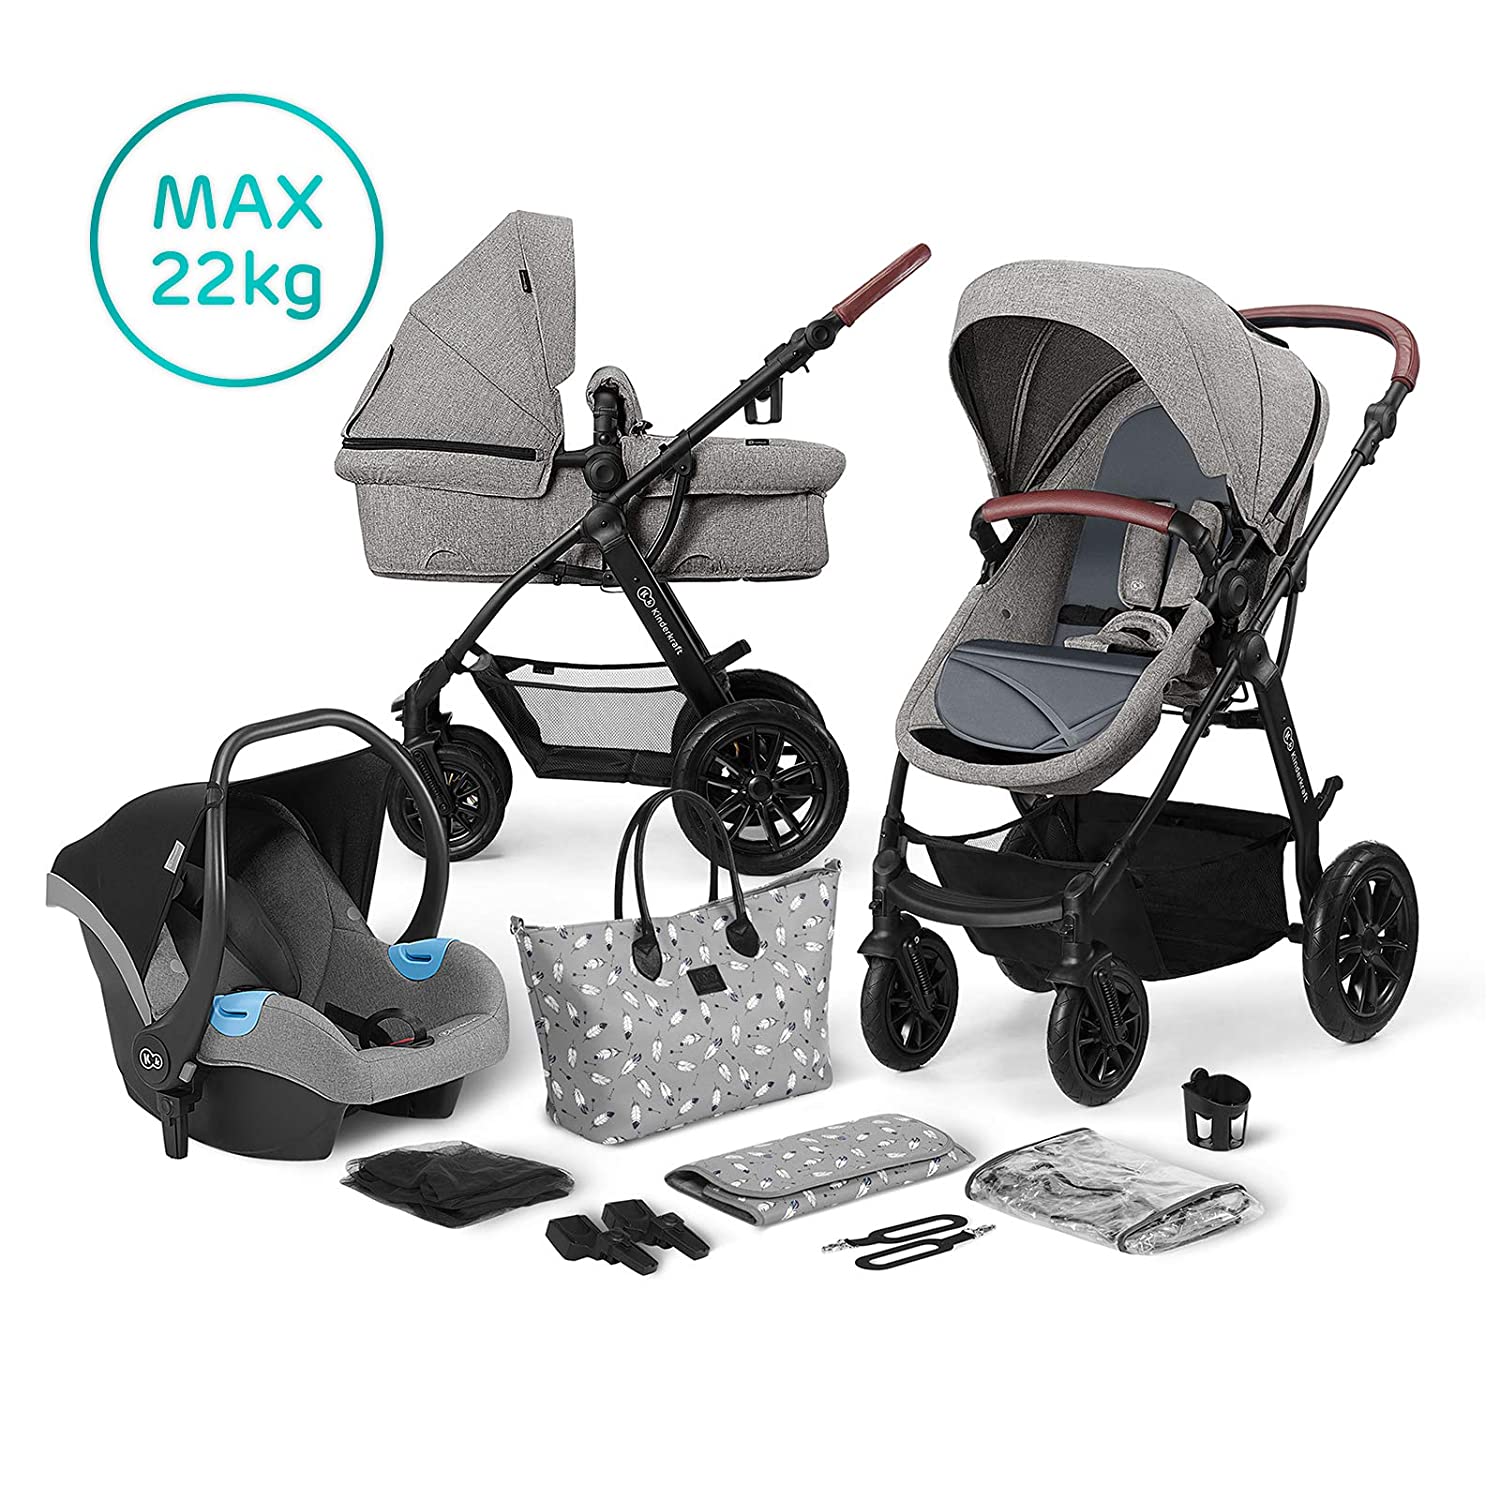 Kinderkraft Pram 3-in-1 XMOOV Pushchair Set, Pushchair, Buggy and Carry Cot in One, Baby Seat, Rubber Wheels with Suspension, Folding, Accessories Set, Elegant Shopping Bag, Grey